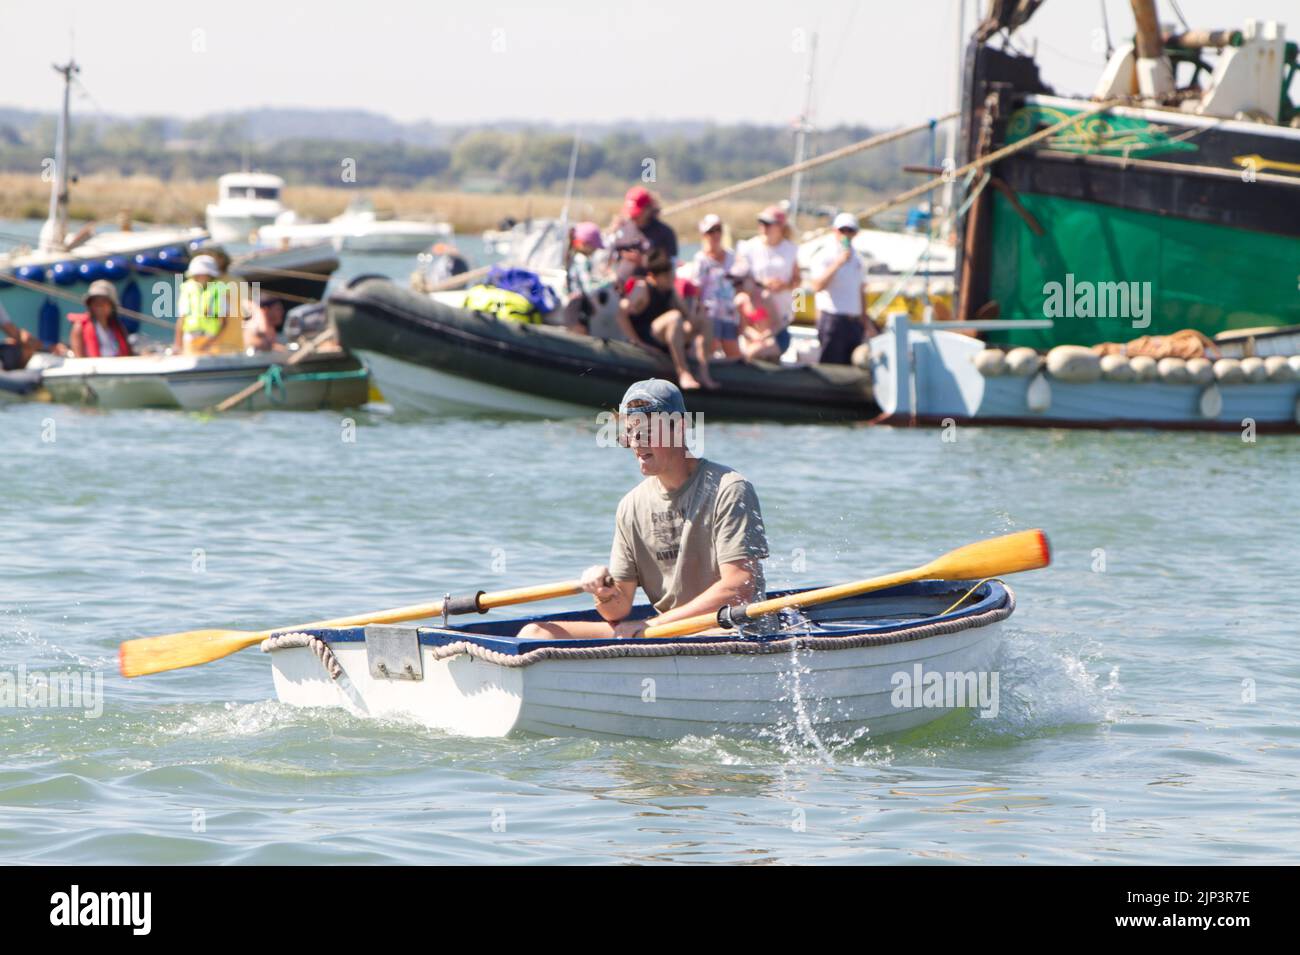 West Mersea Town Regatta on Mersea Island in Essex. One of the rowing races. Stock Photo